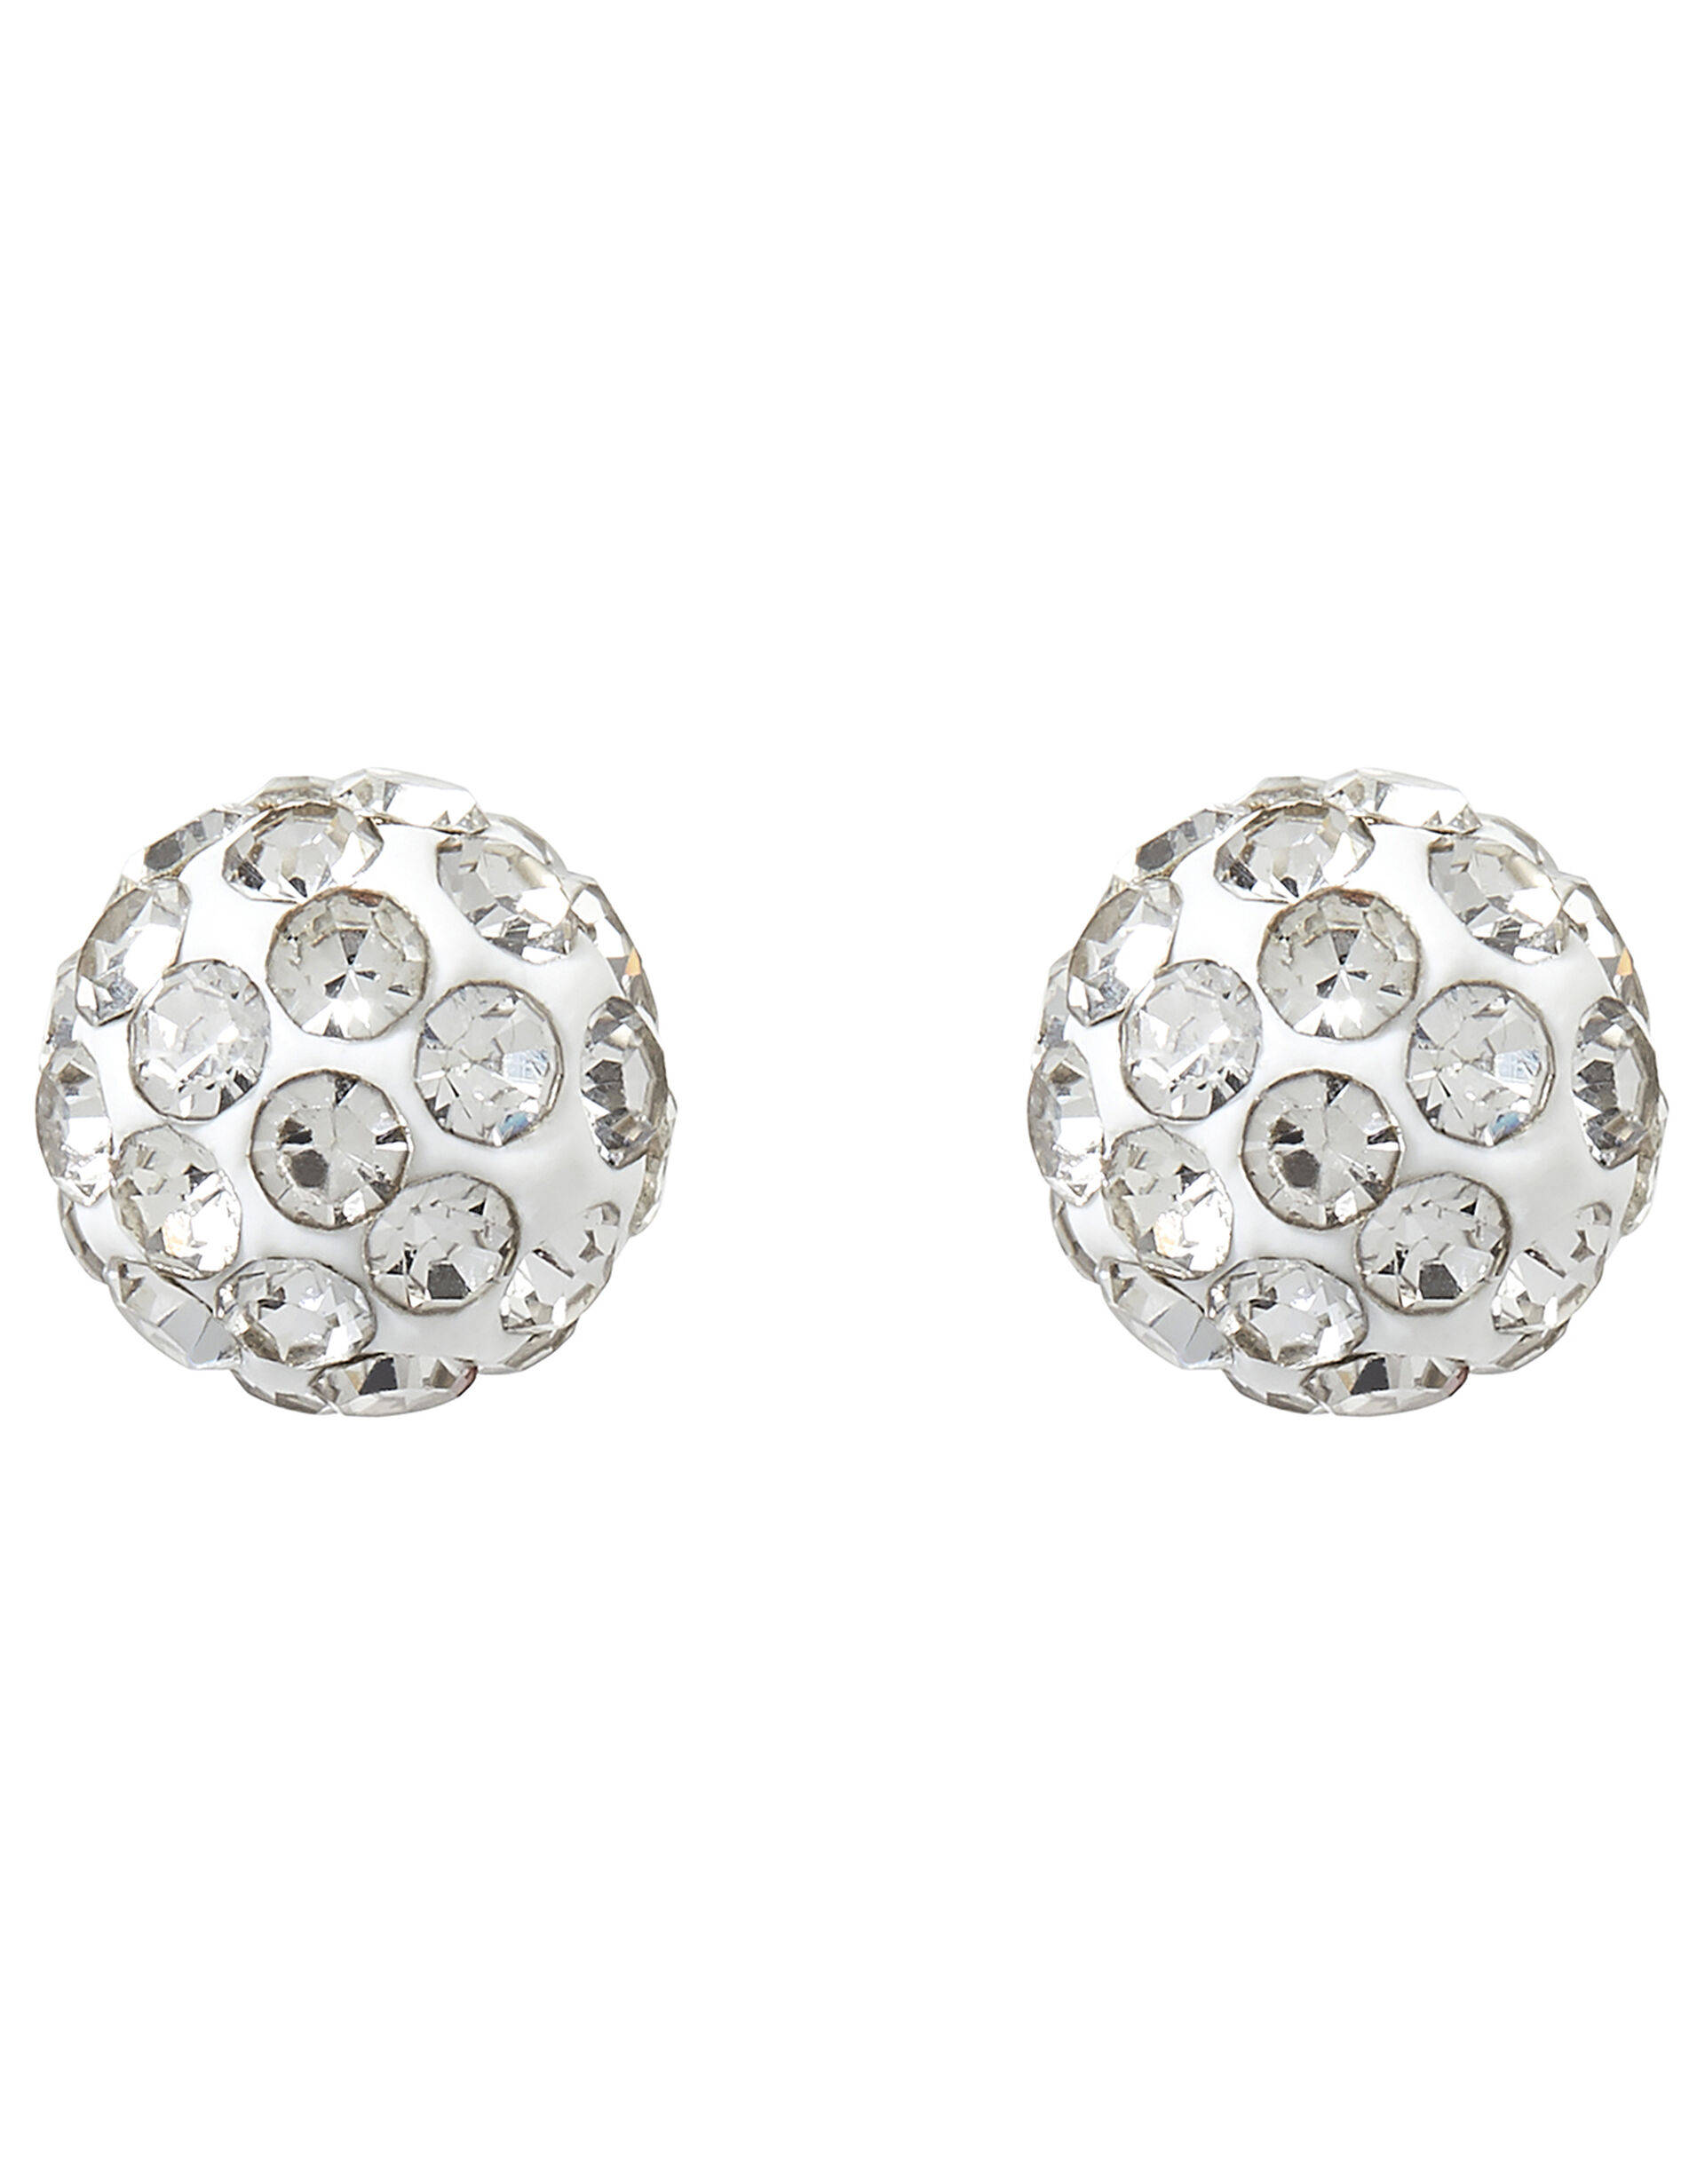 Sterling Silver Pave Ball Stud Earrings, , large